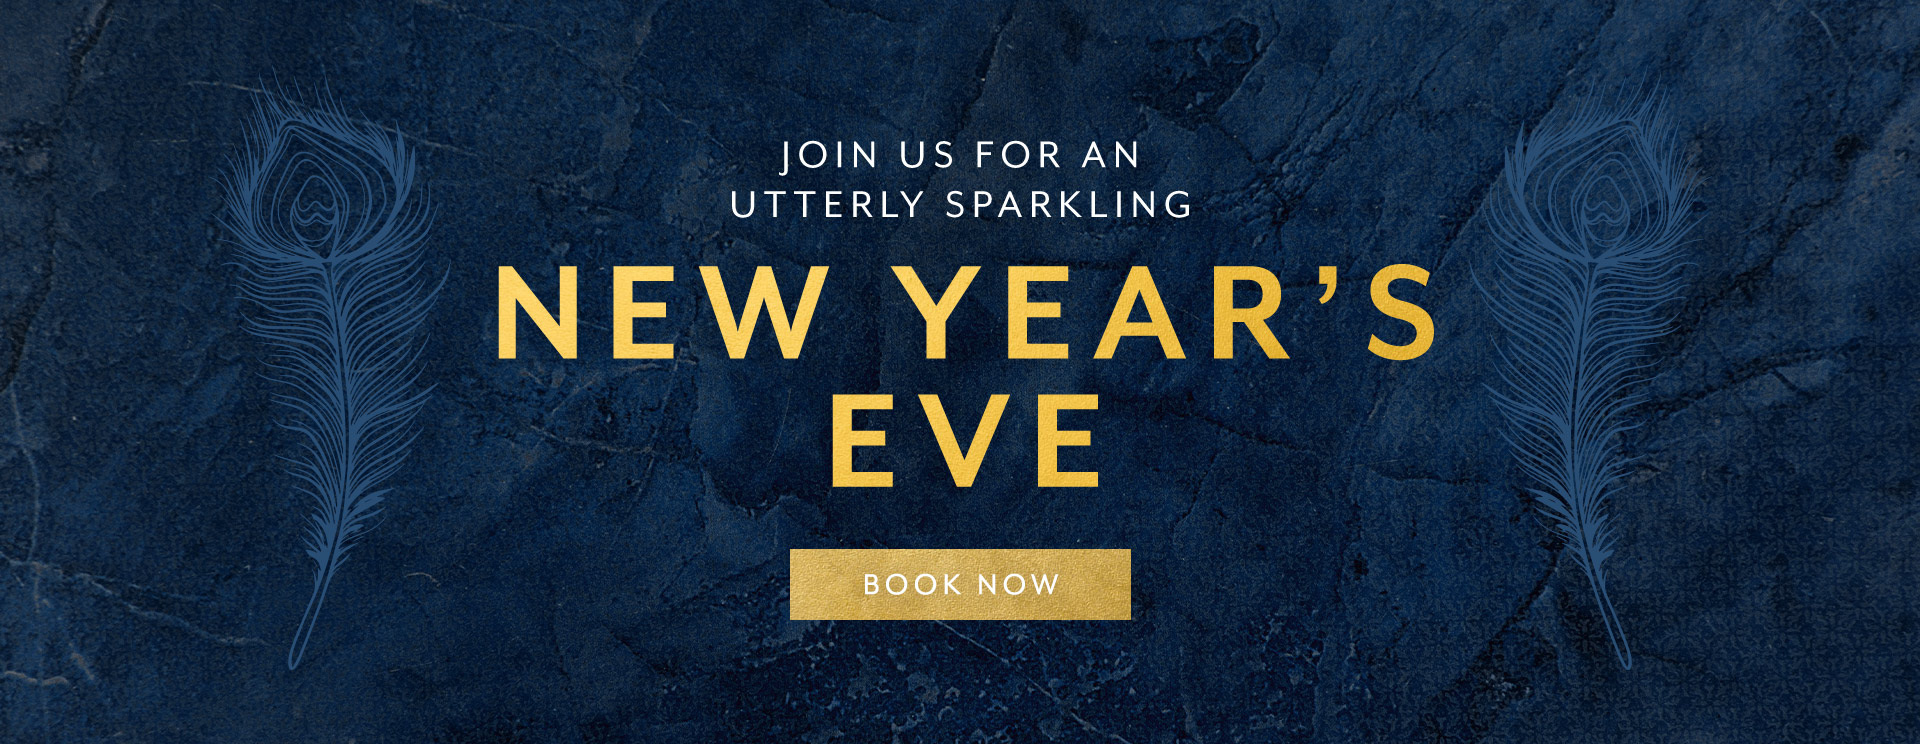 New Year's Eve at The Blue Anchor